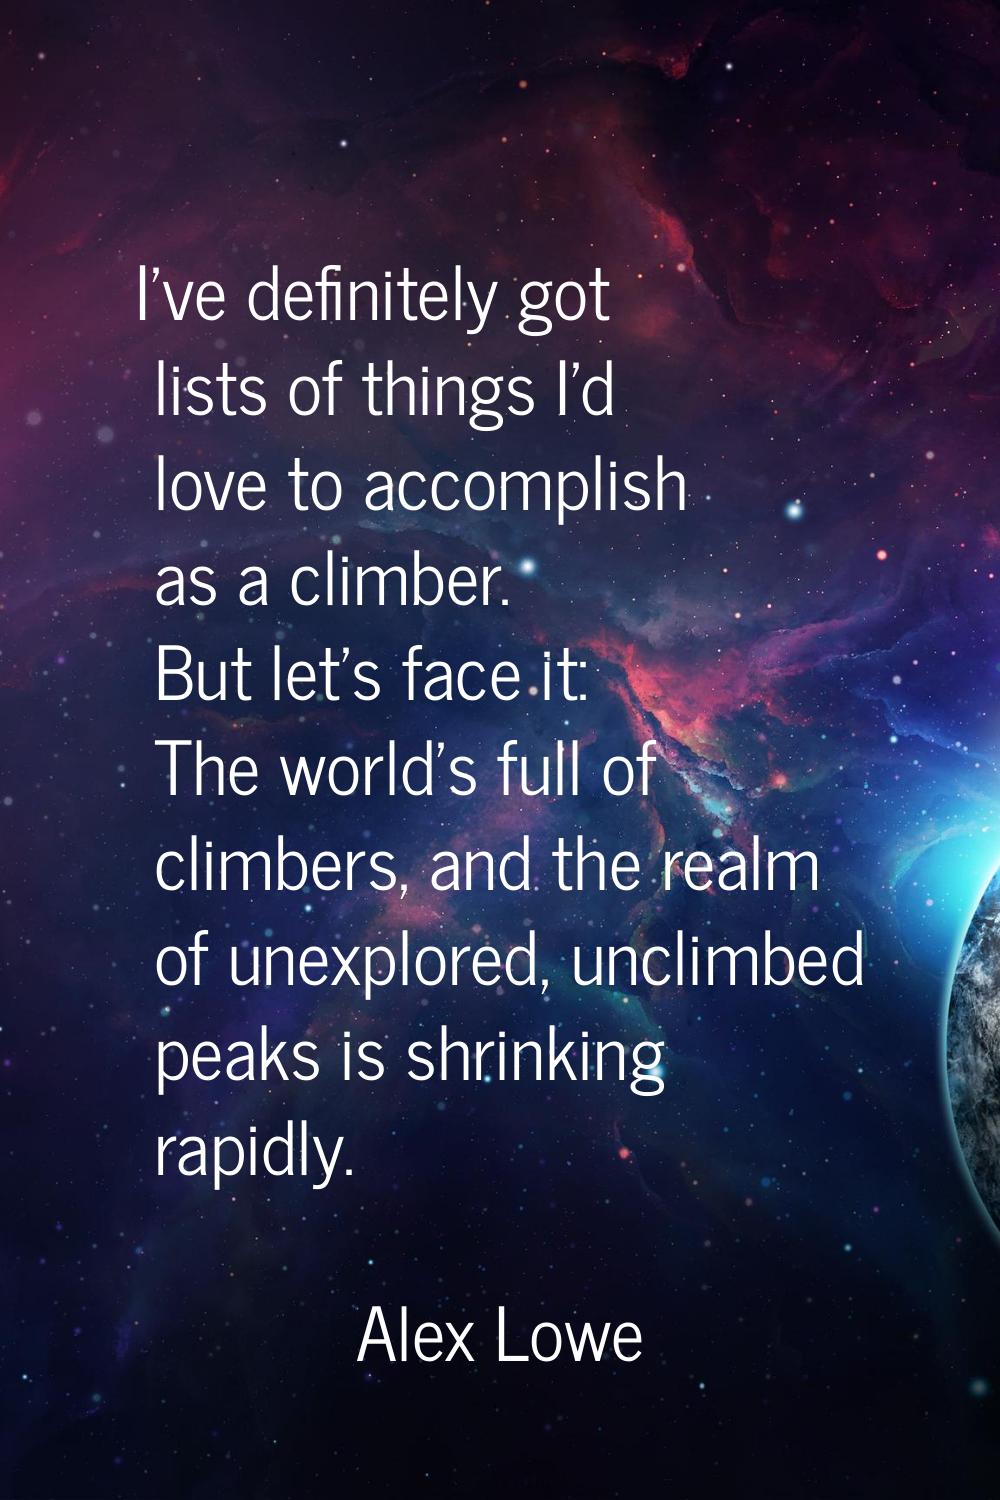 I've definitely got lists of things I'd love to accomplish as a climber. But let's face it: The wor